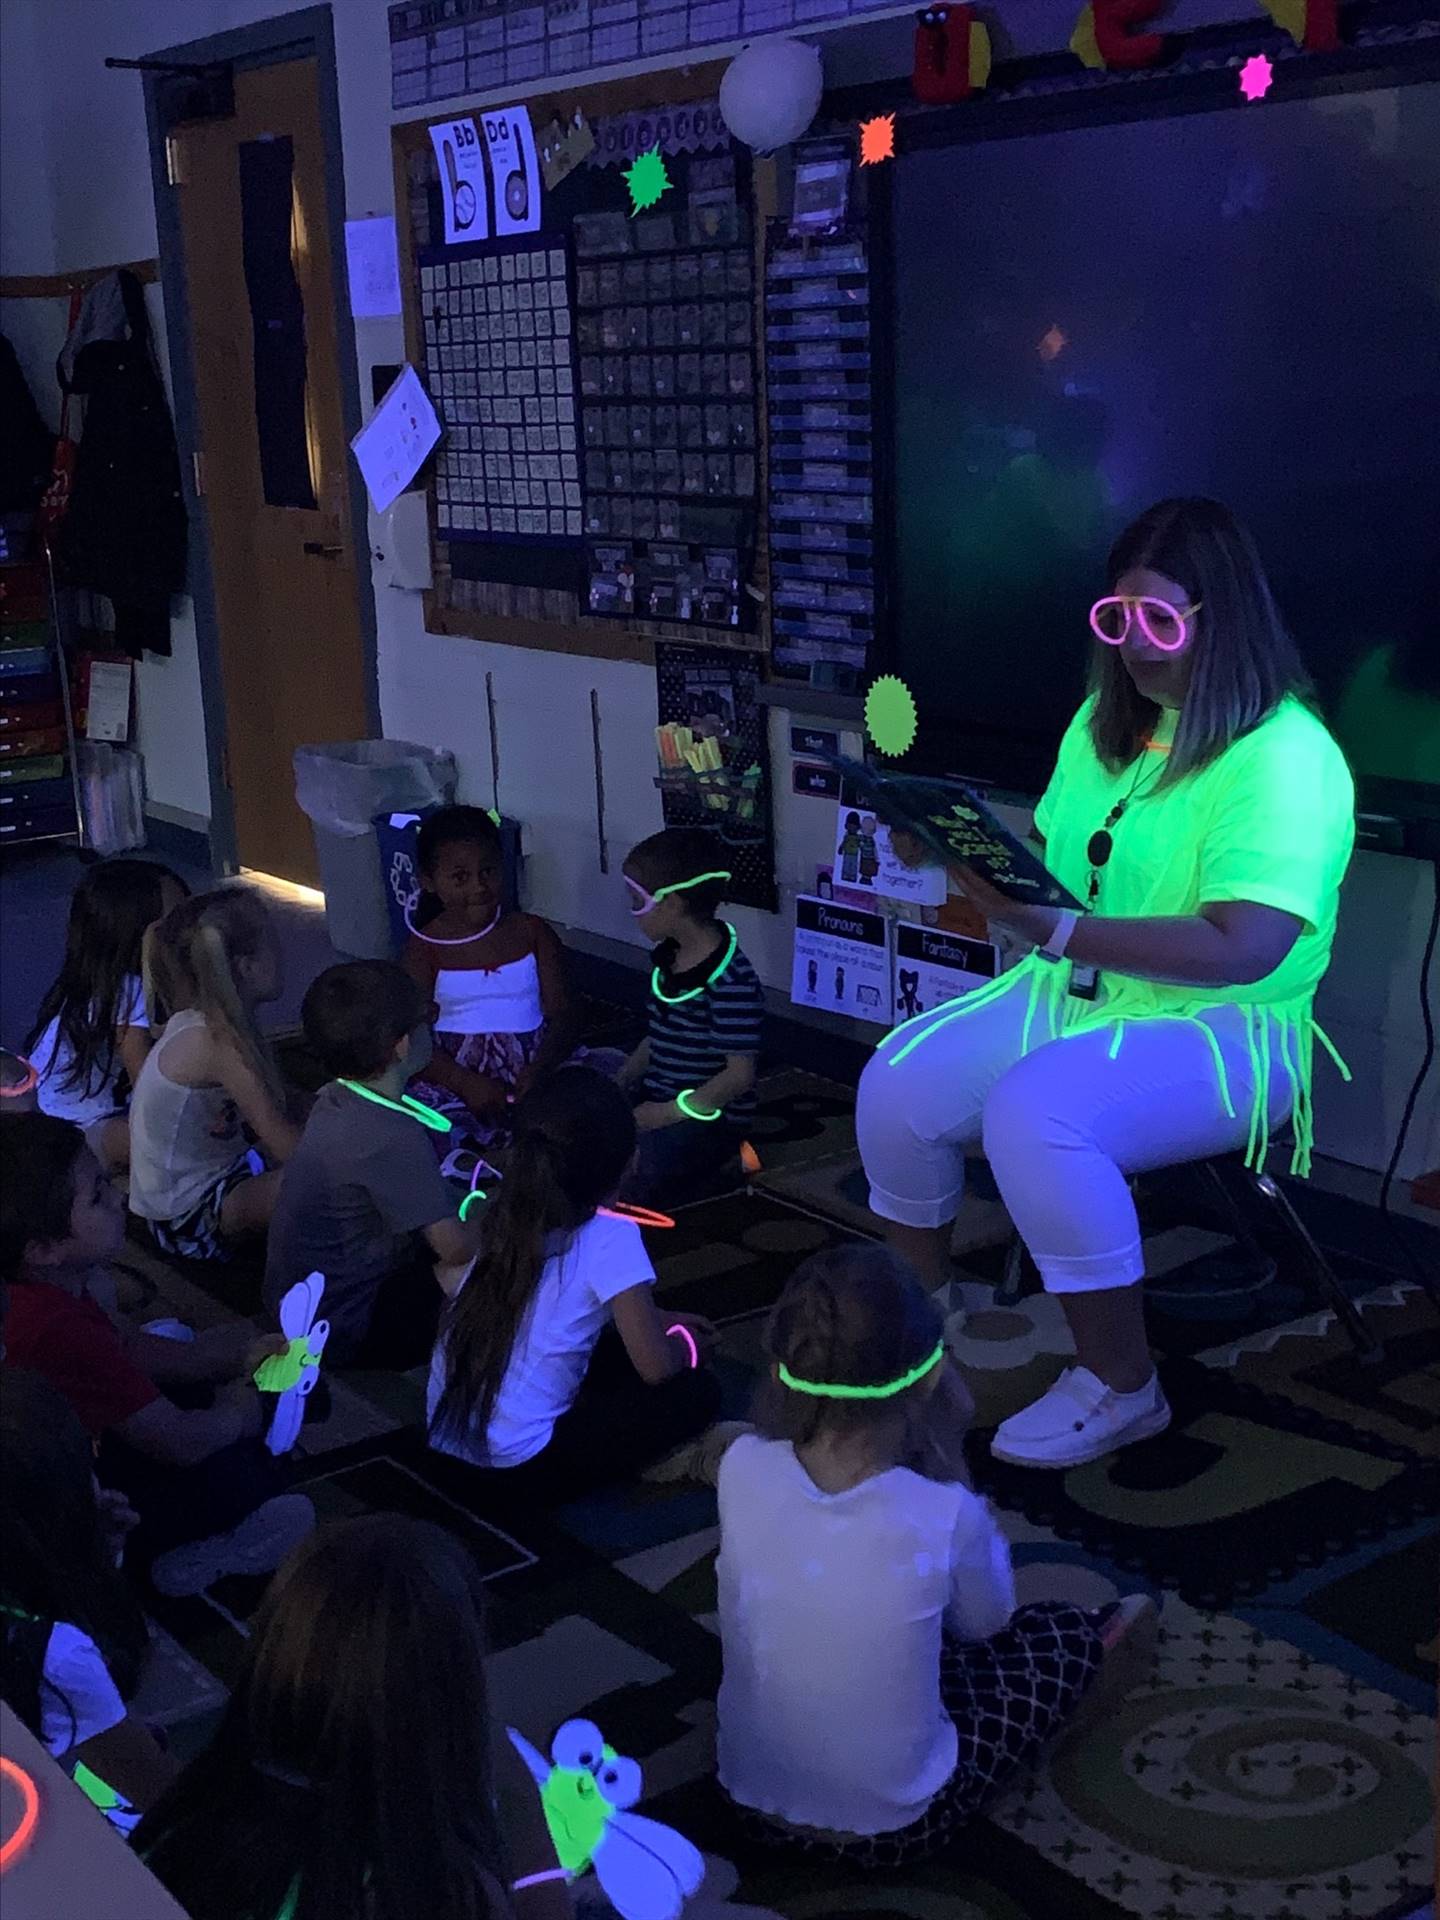 2 students with glow glasses and necklace